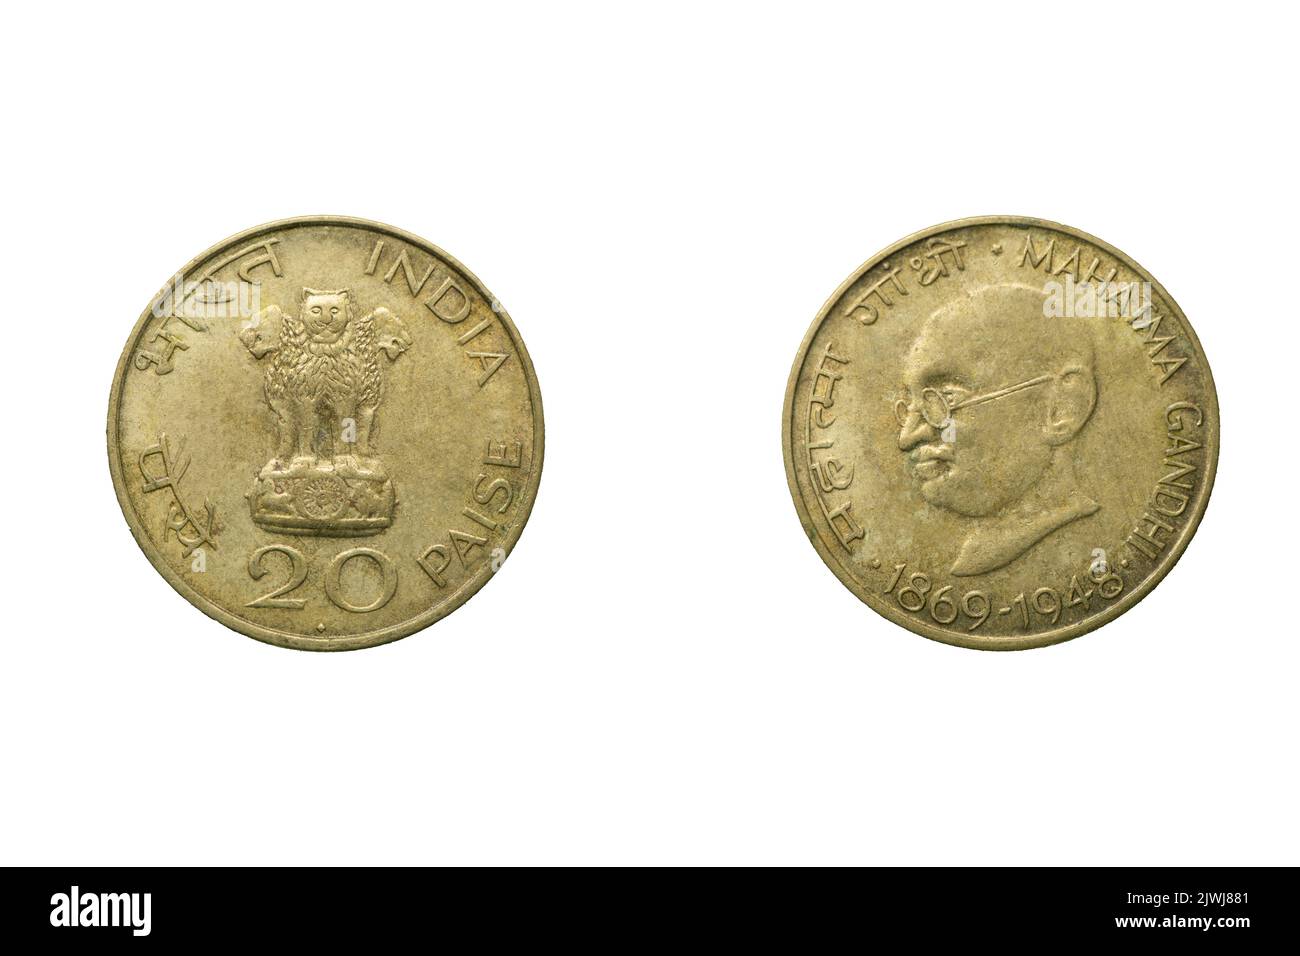 20 paise coin, Front and back, India, Mahatma Gandhi Stock Photo